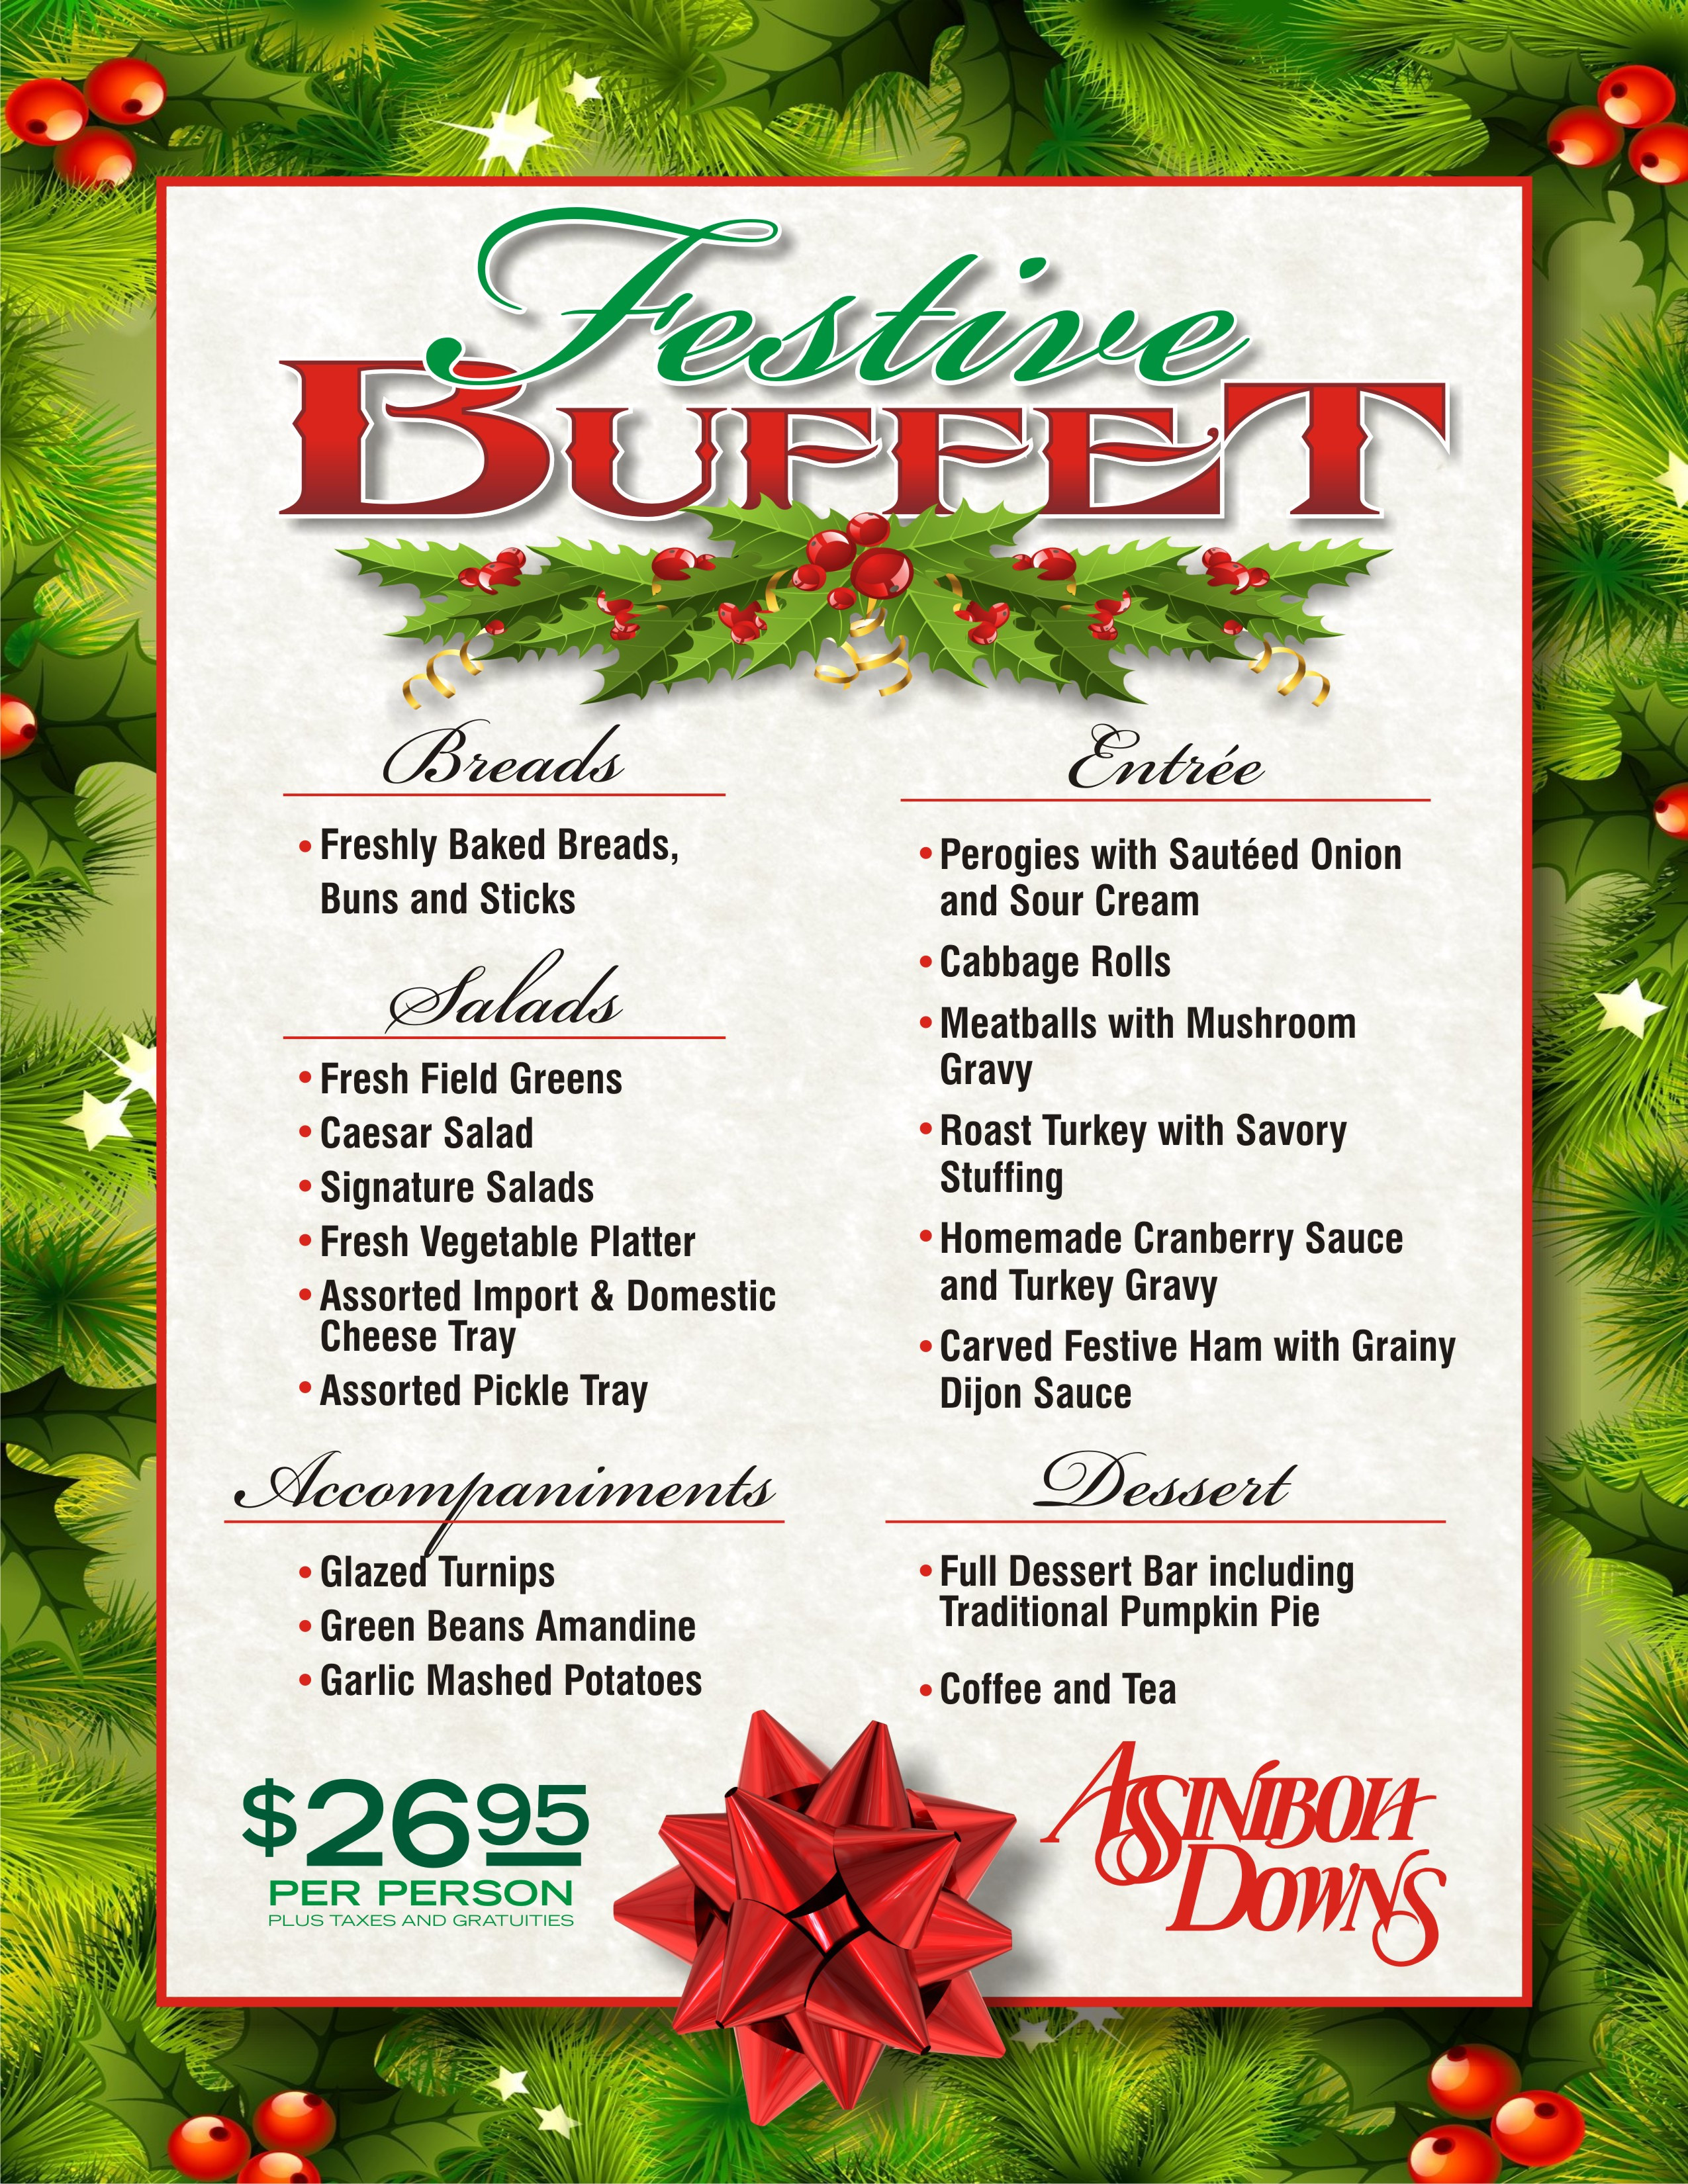 Christmas Party Menu Ideas For Large Groups
 Dining Assiniboia Downs Live Racing Simulcast Racing